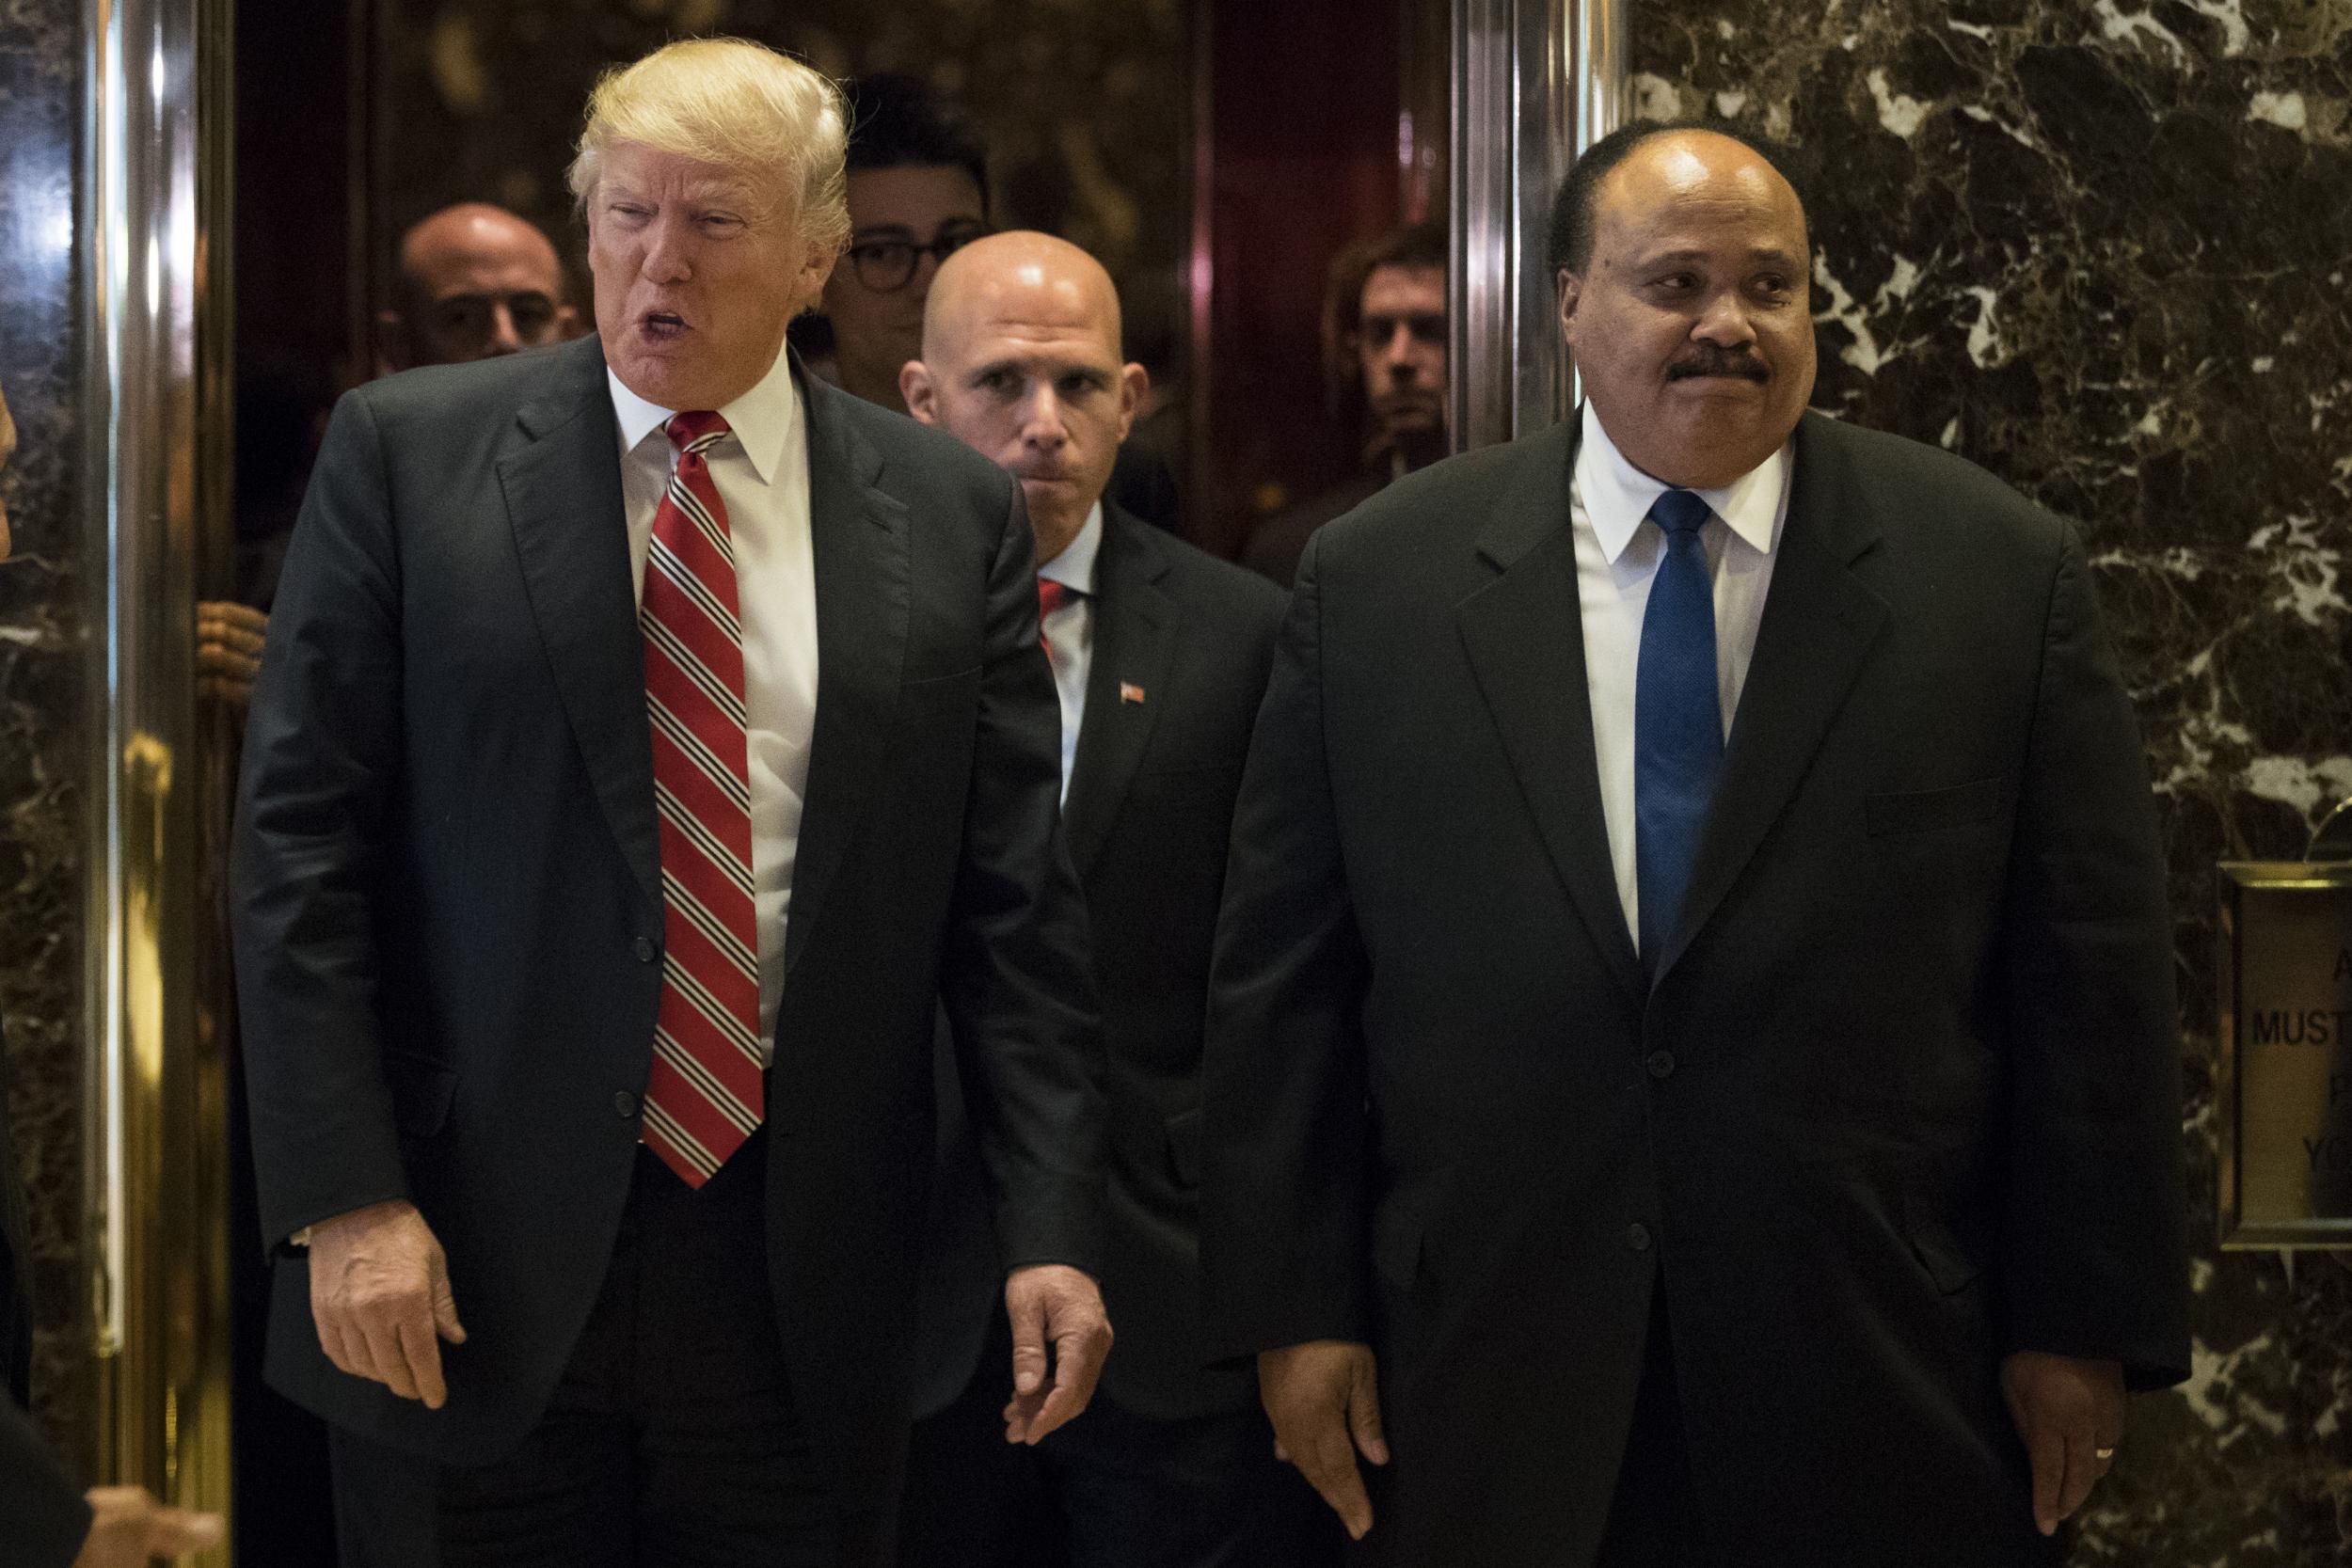 The then President-elect Donald Trump and Martin Luther King III pictured after their meeting at Trump Tower in January 2017